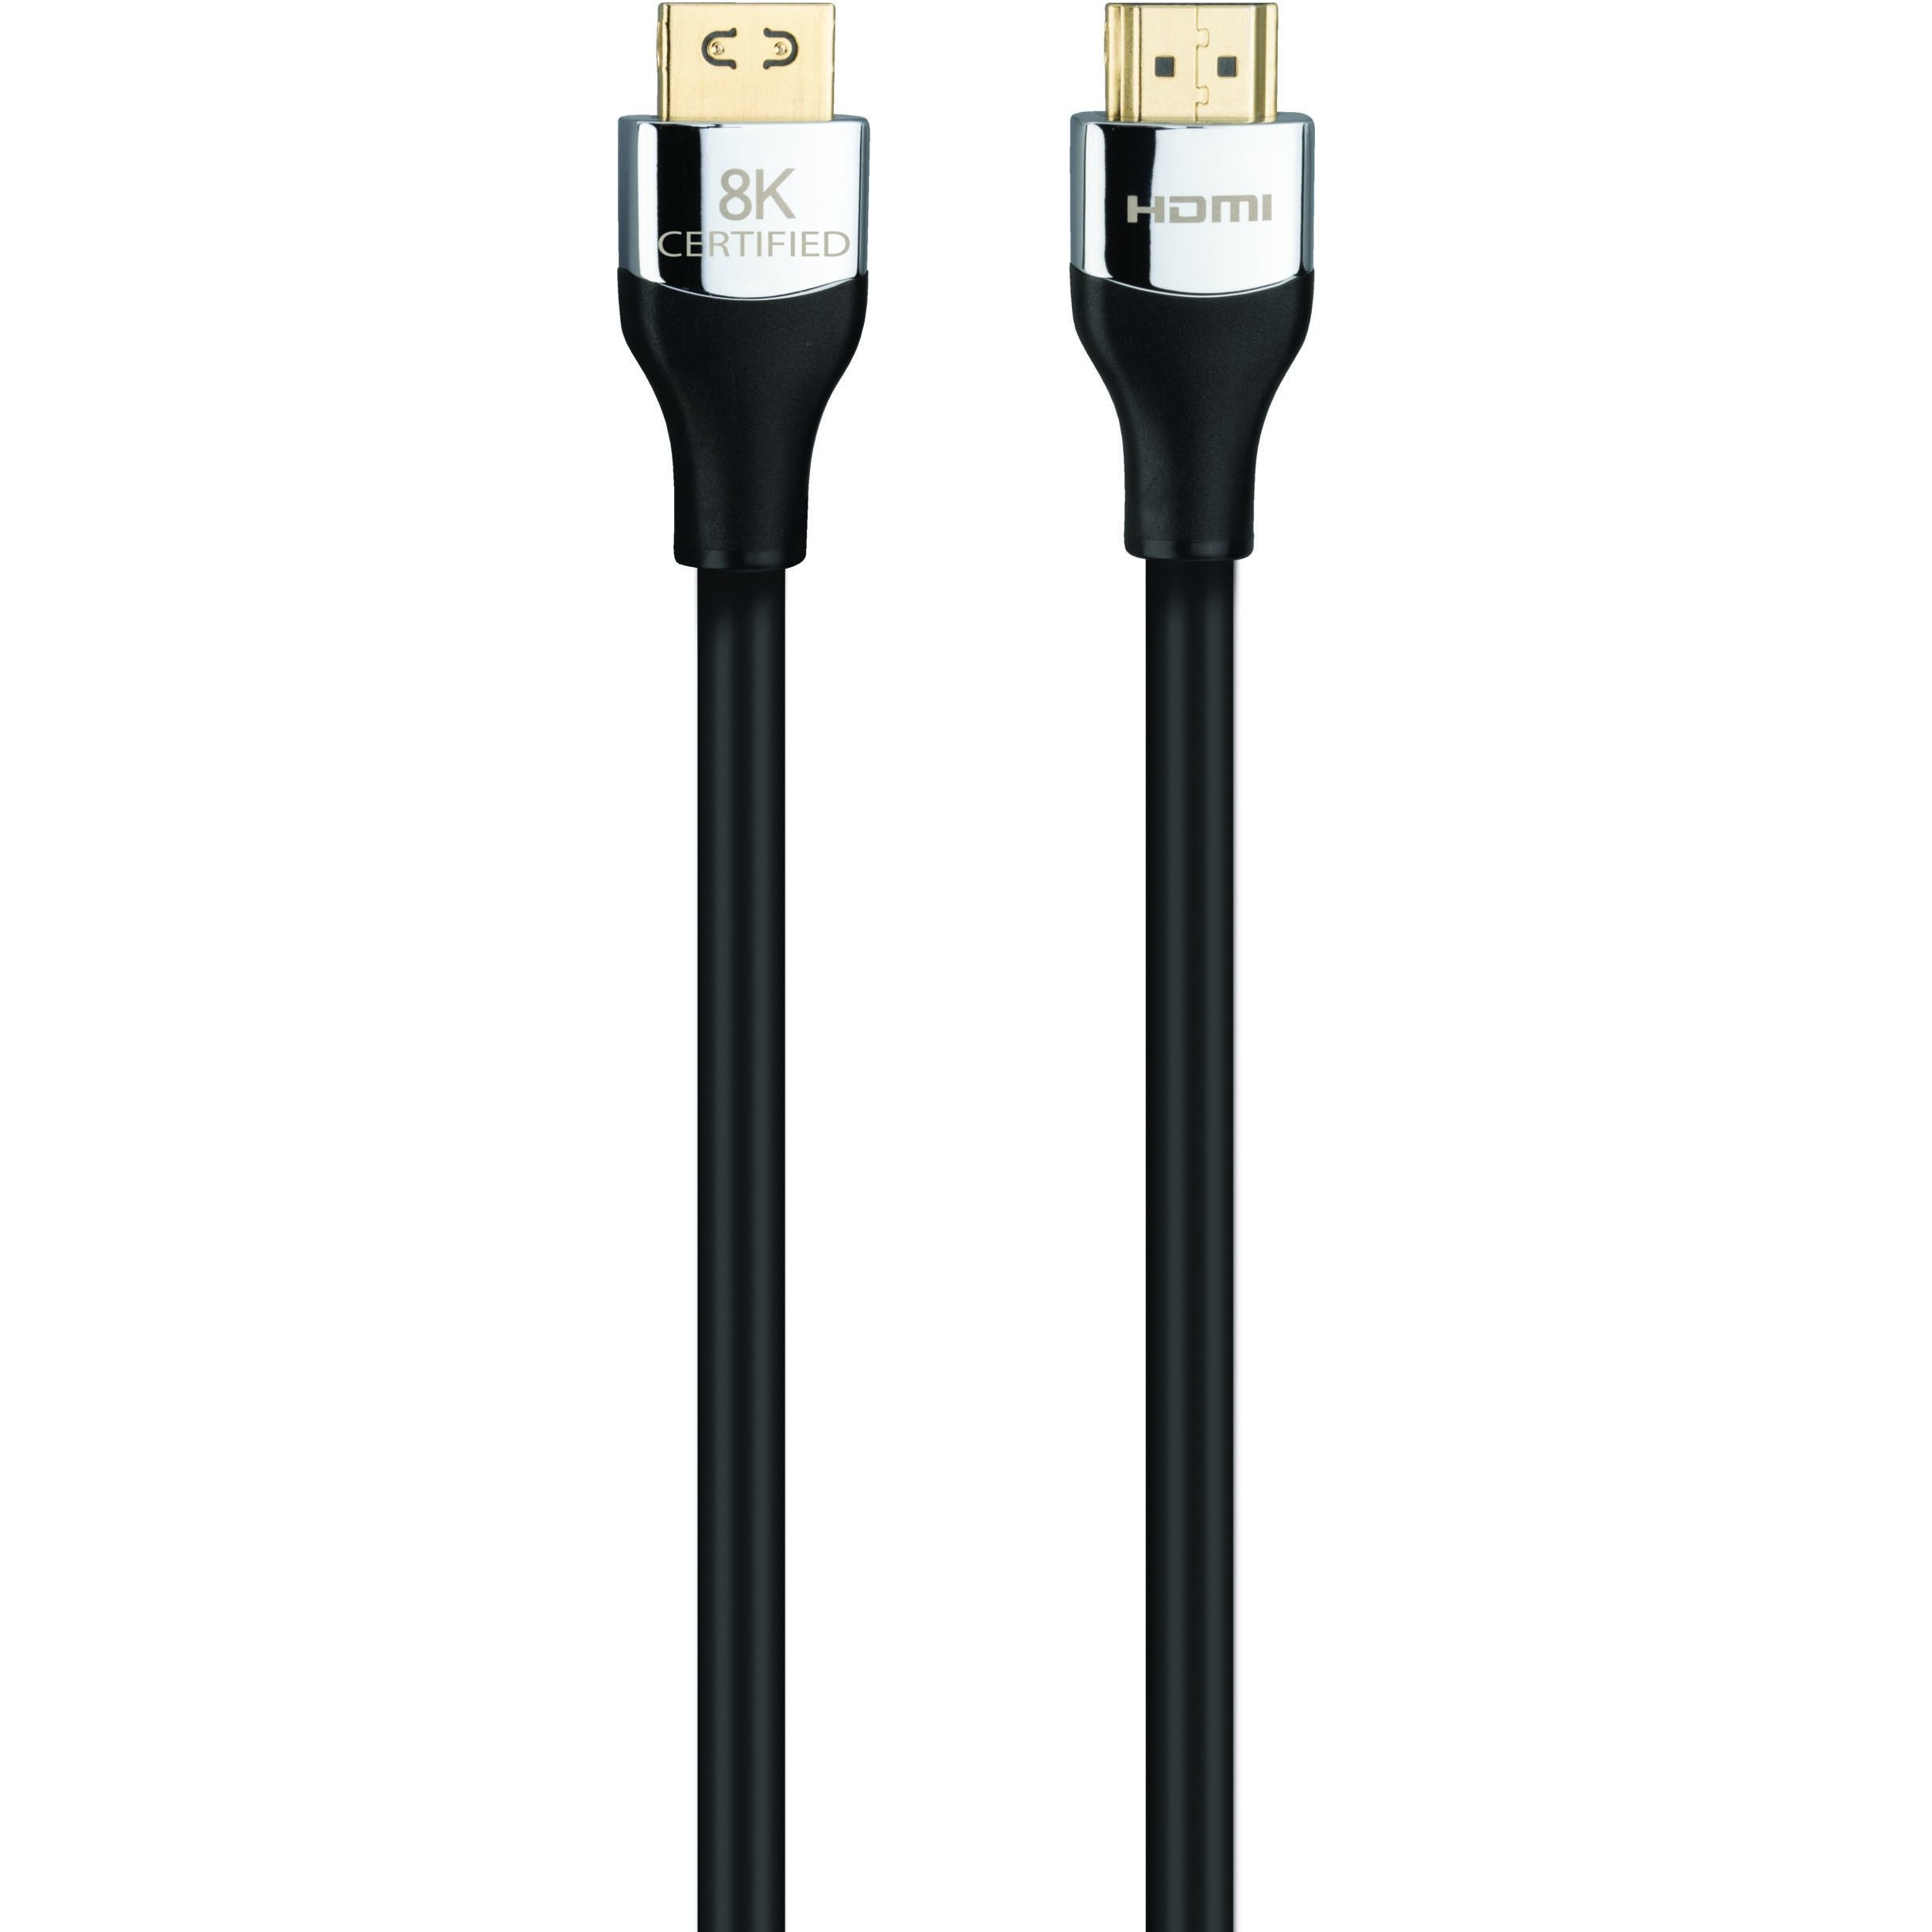 Vanco UHD 8K Certified Ultra High Speed HDMI 2.1 Cable